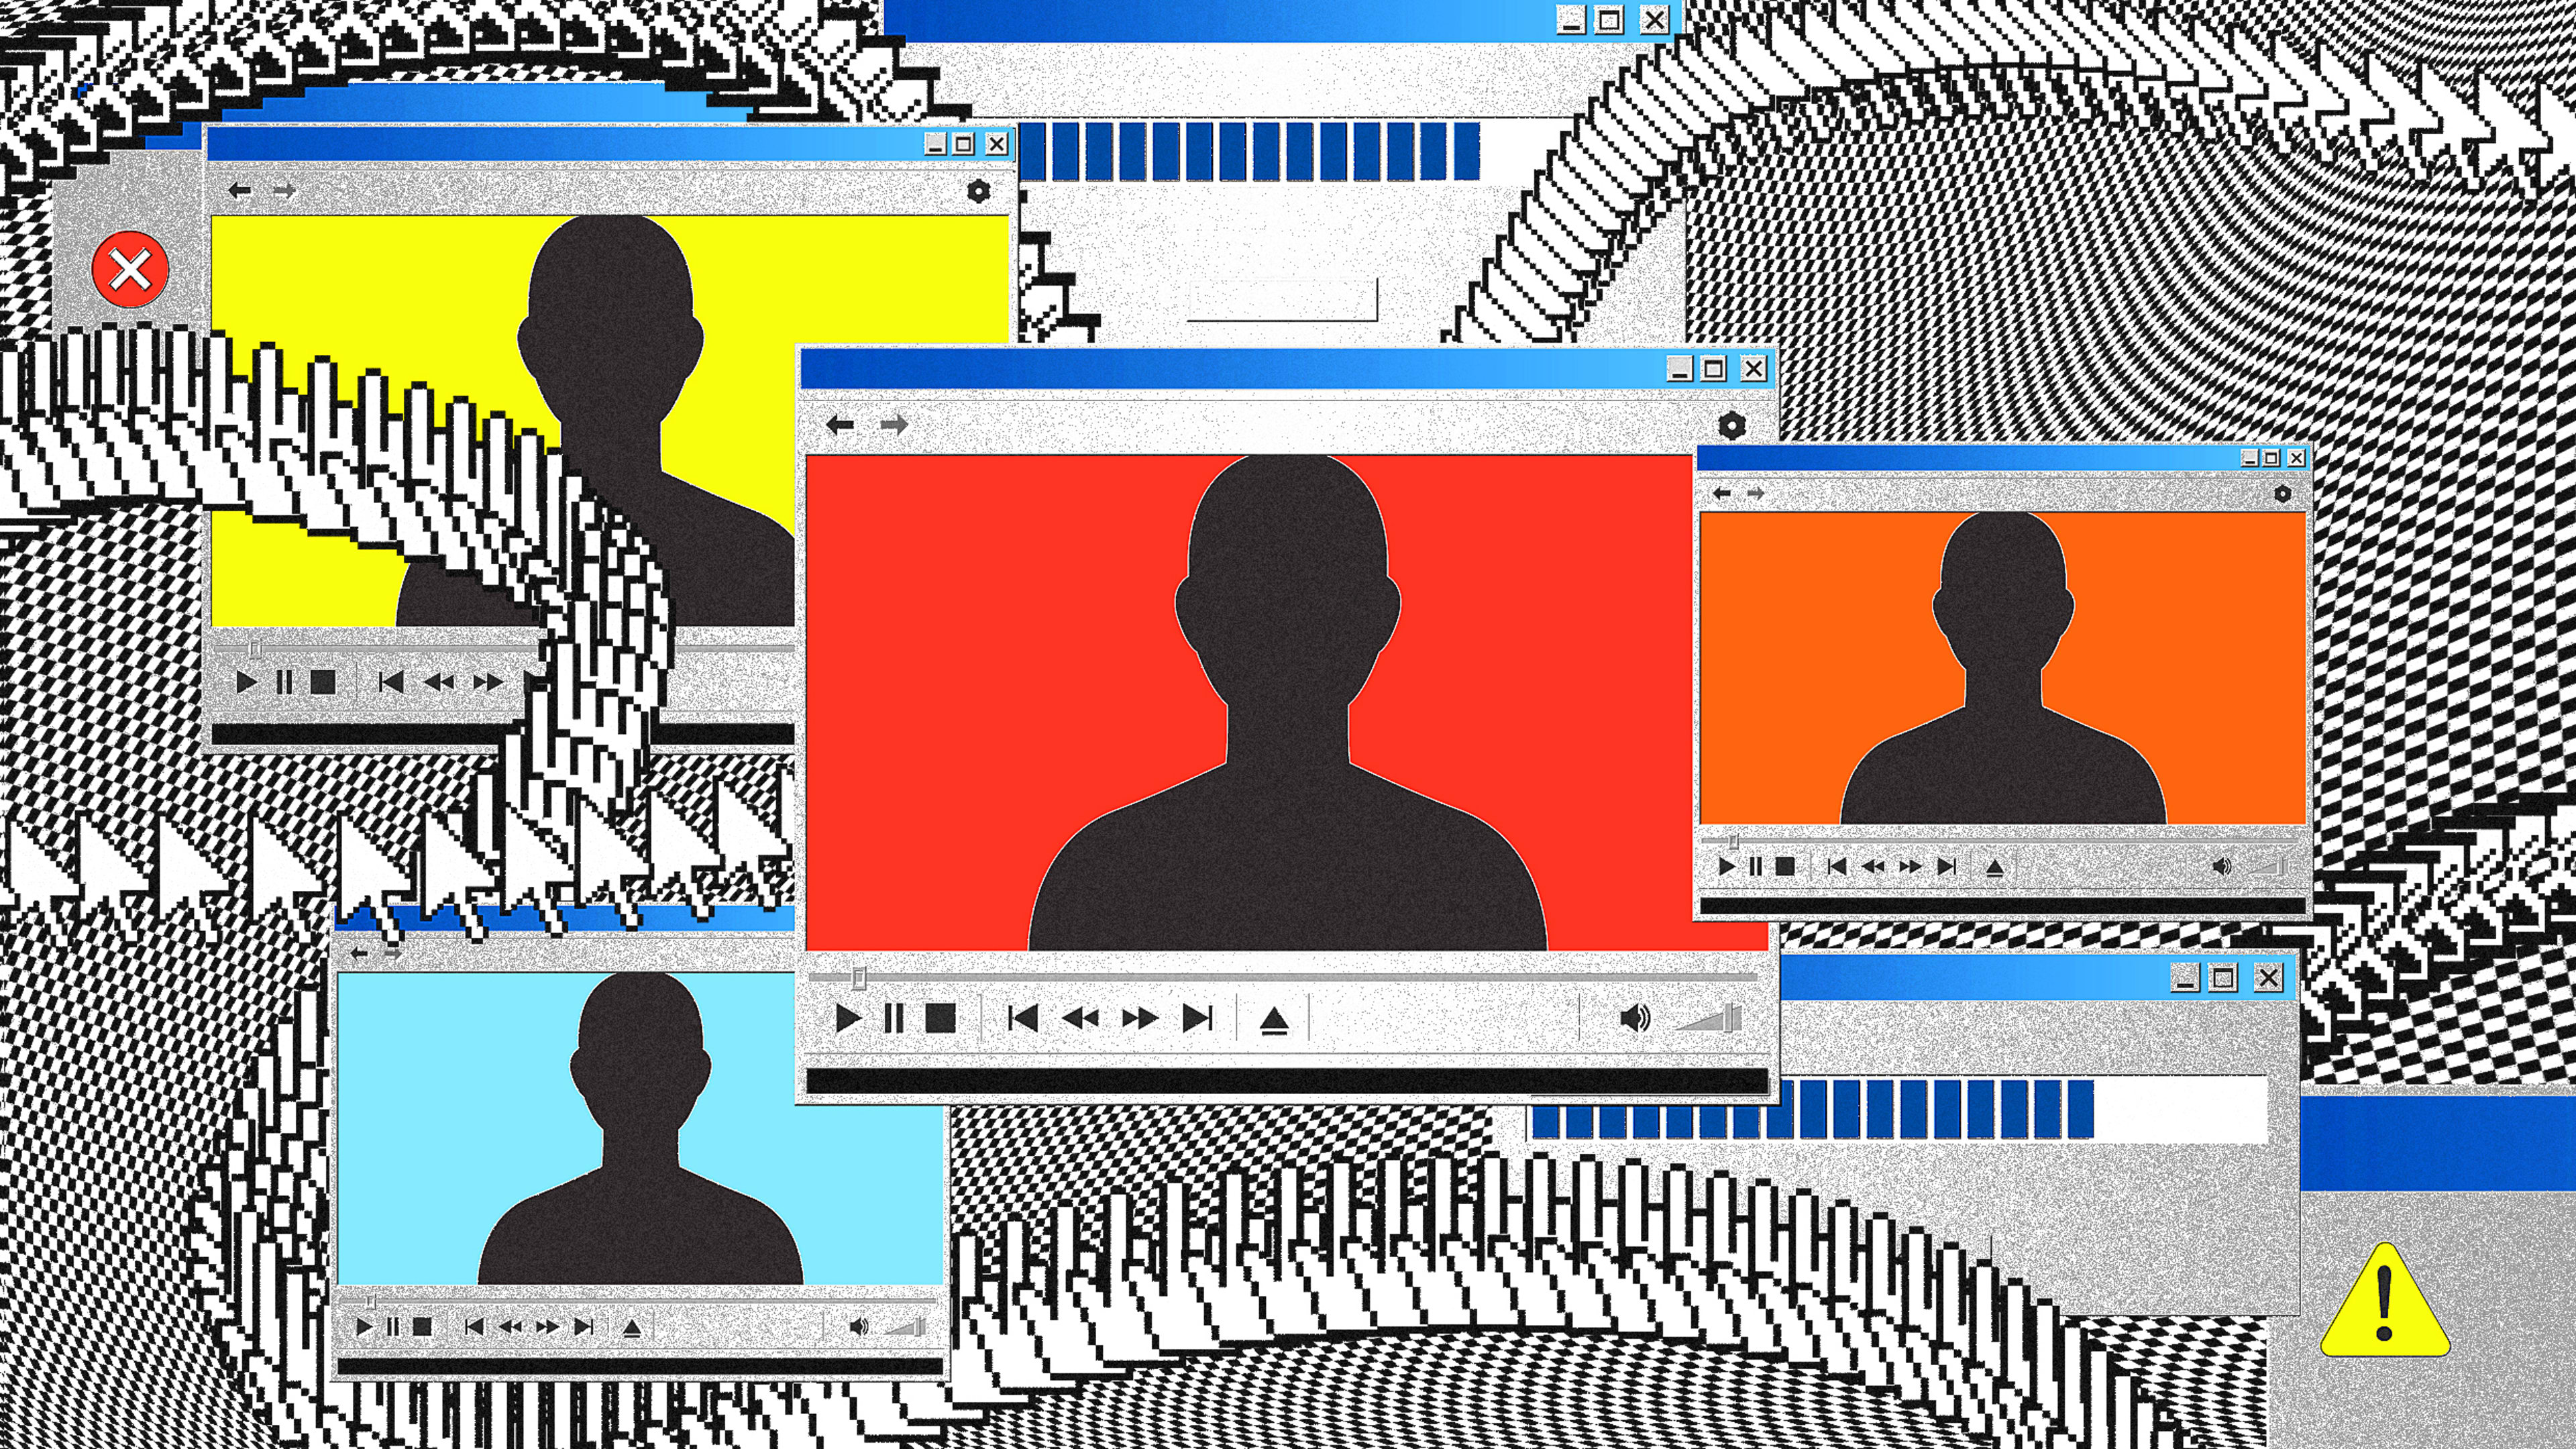 We’re in a golden age of UX. Why is video chat still stuck in the ’90s?